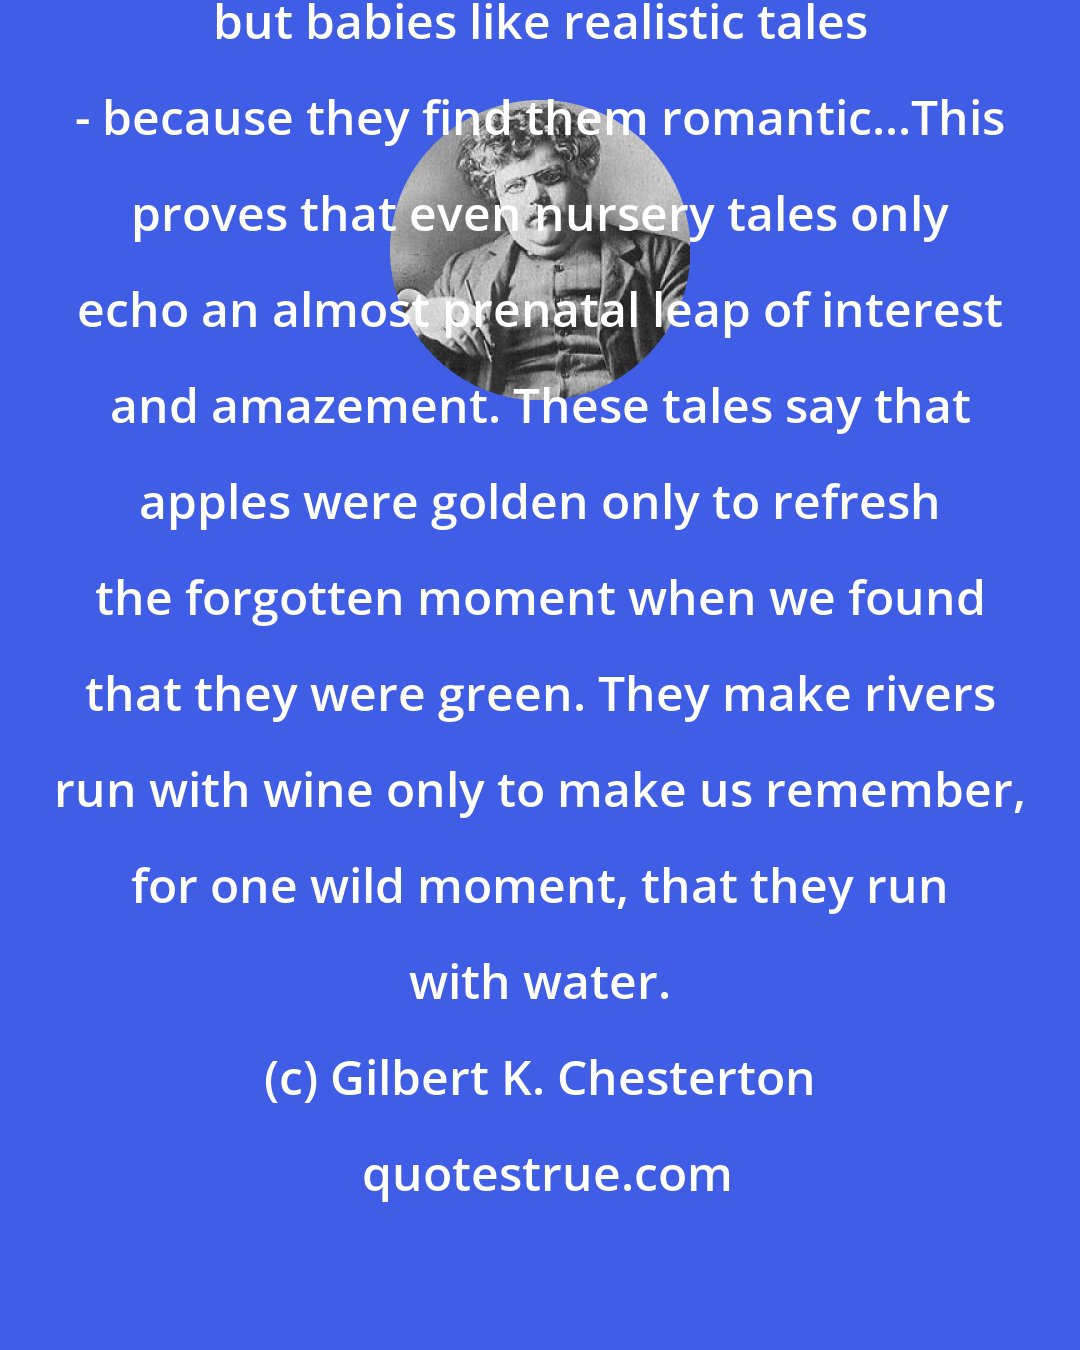 Gilbert K. Chesterton: Boys like romantic [fairy] tales; but babies like realistic tales - because they find them romantic...This proves that even nursery tales only echo an almost prenatal leap of interest and amazement. These tales say that apples were golden only to refresh the forgotten moment when we found that they were green. They make rivers run with wine only to make us remember, for one wild moment, that they run with water.